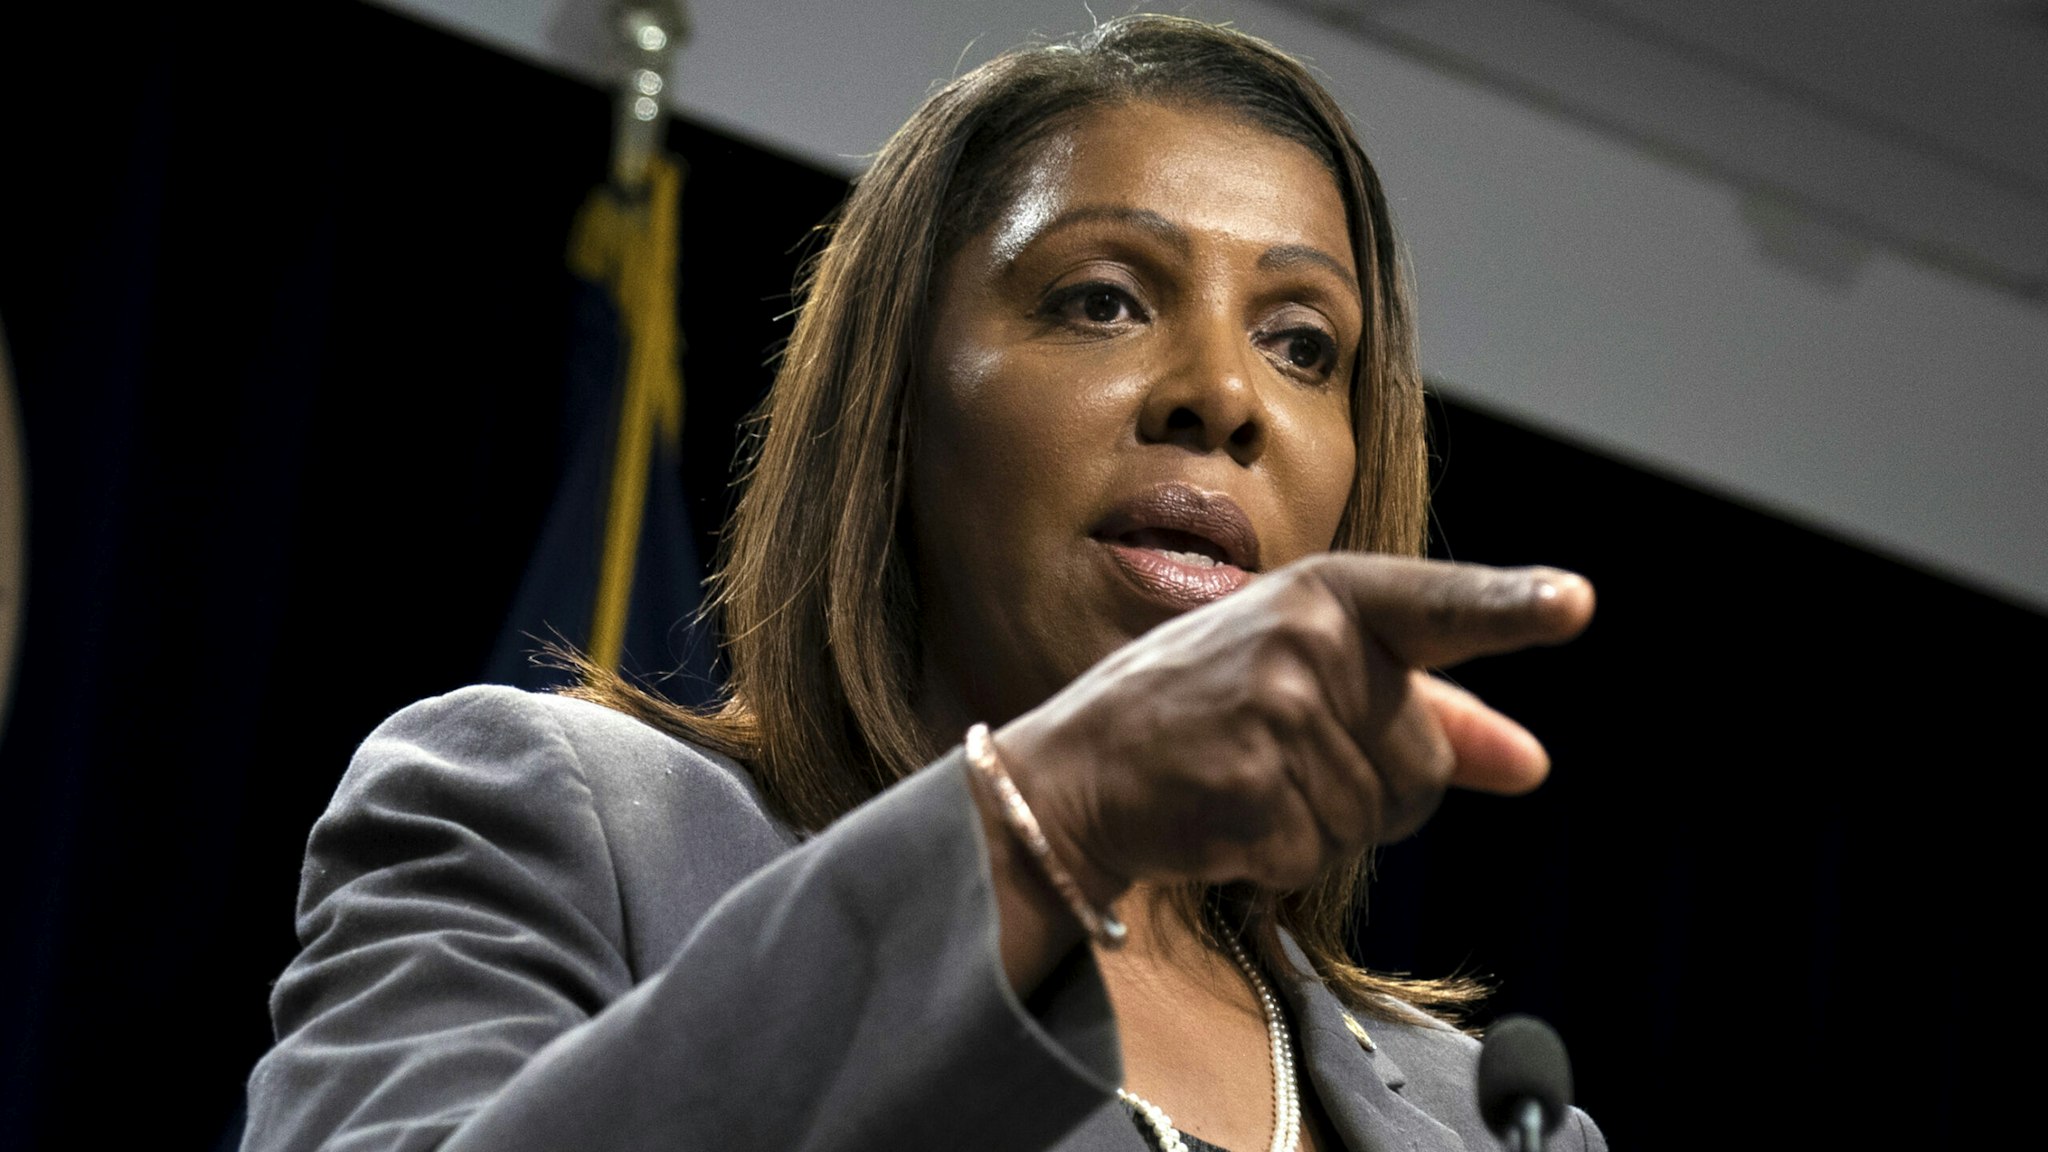 NEW YORK, NY - JUNE 11: New York Attorney General Letitia James speaks during a press conference, June 11, 2019 in New York City. James announced that New York, California, and seven other states have filed a lawsuit seeking to block the proposed merger between Sprint and T-Mobile. James said that the merger would deprive customers of the benefits of competition and potentially drive up prices for cellphone service.